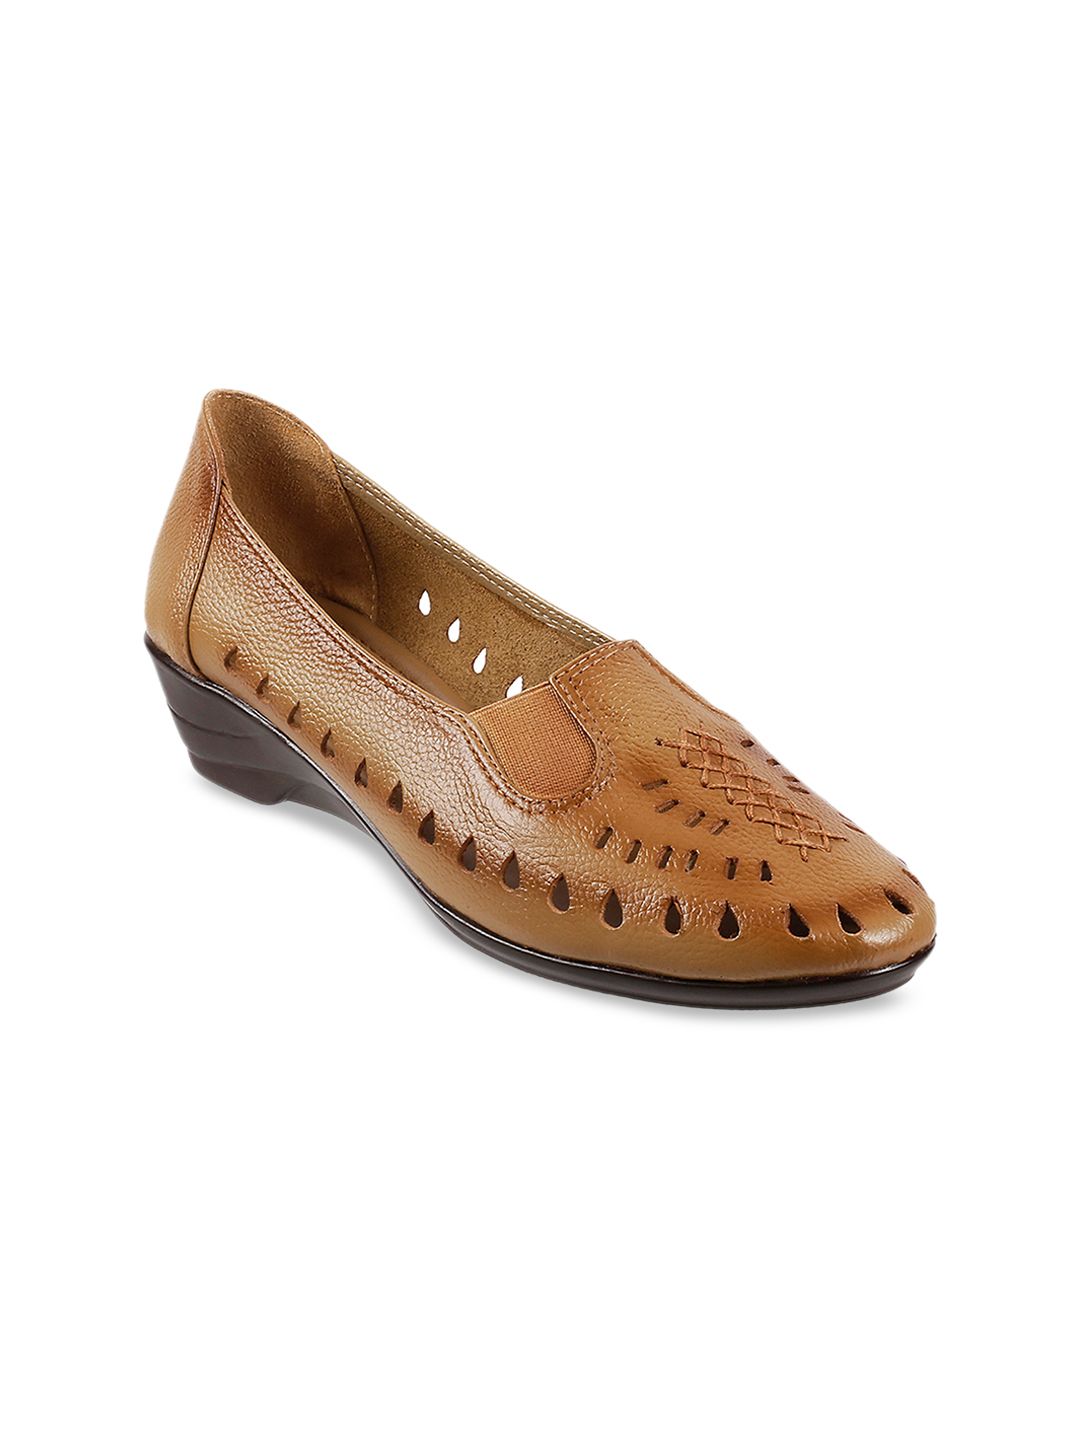 Metro Women Beige Solid Leather Pumps Price in India